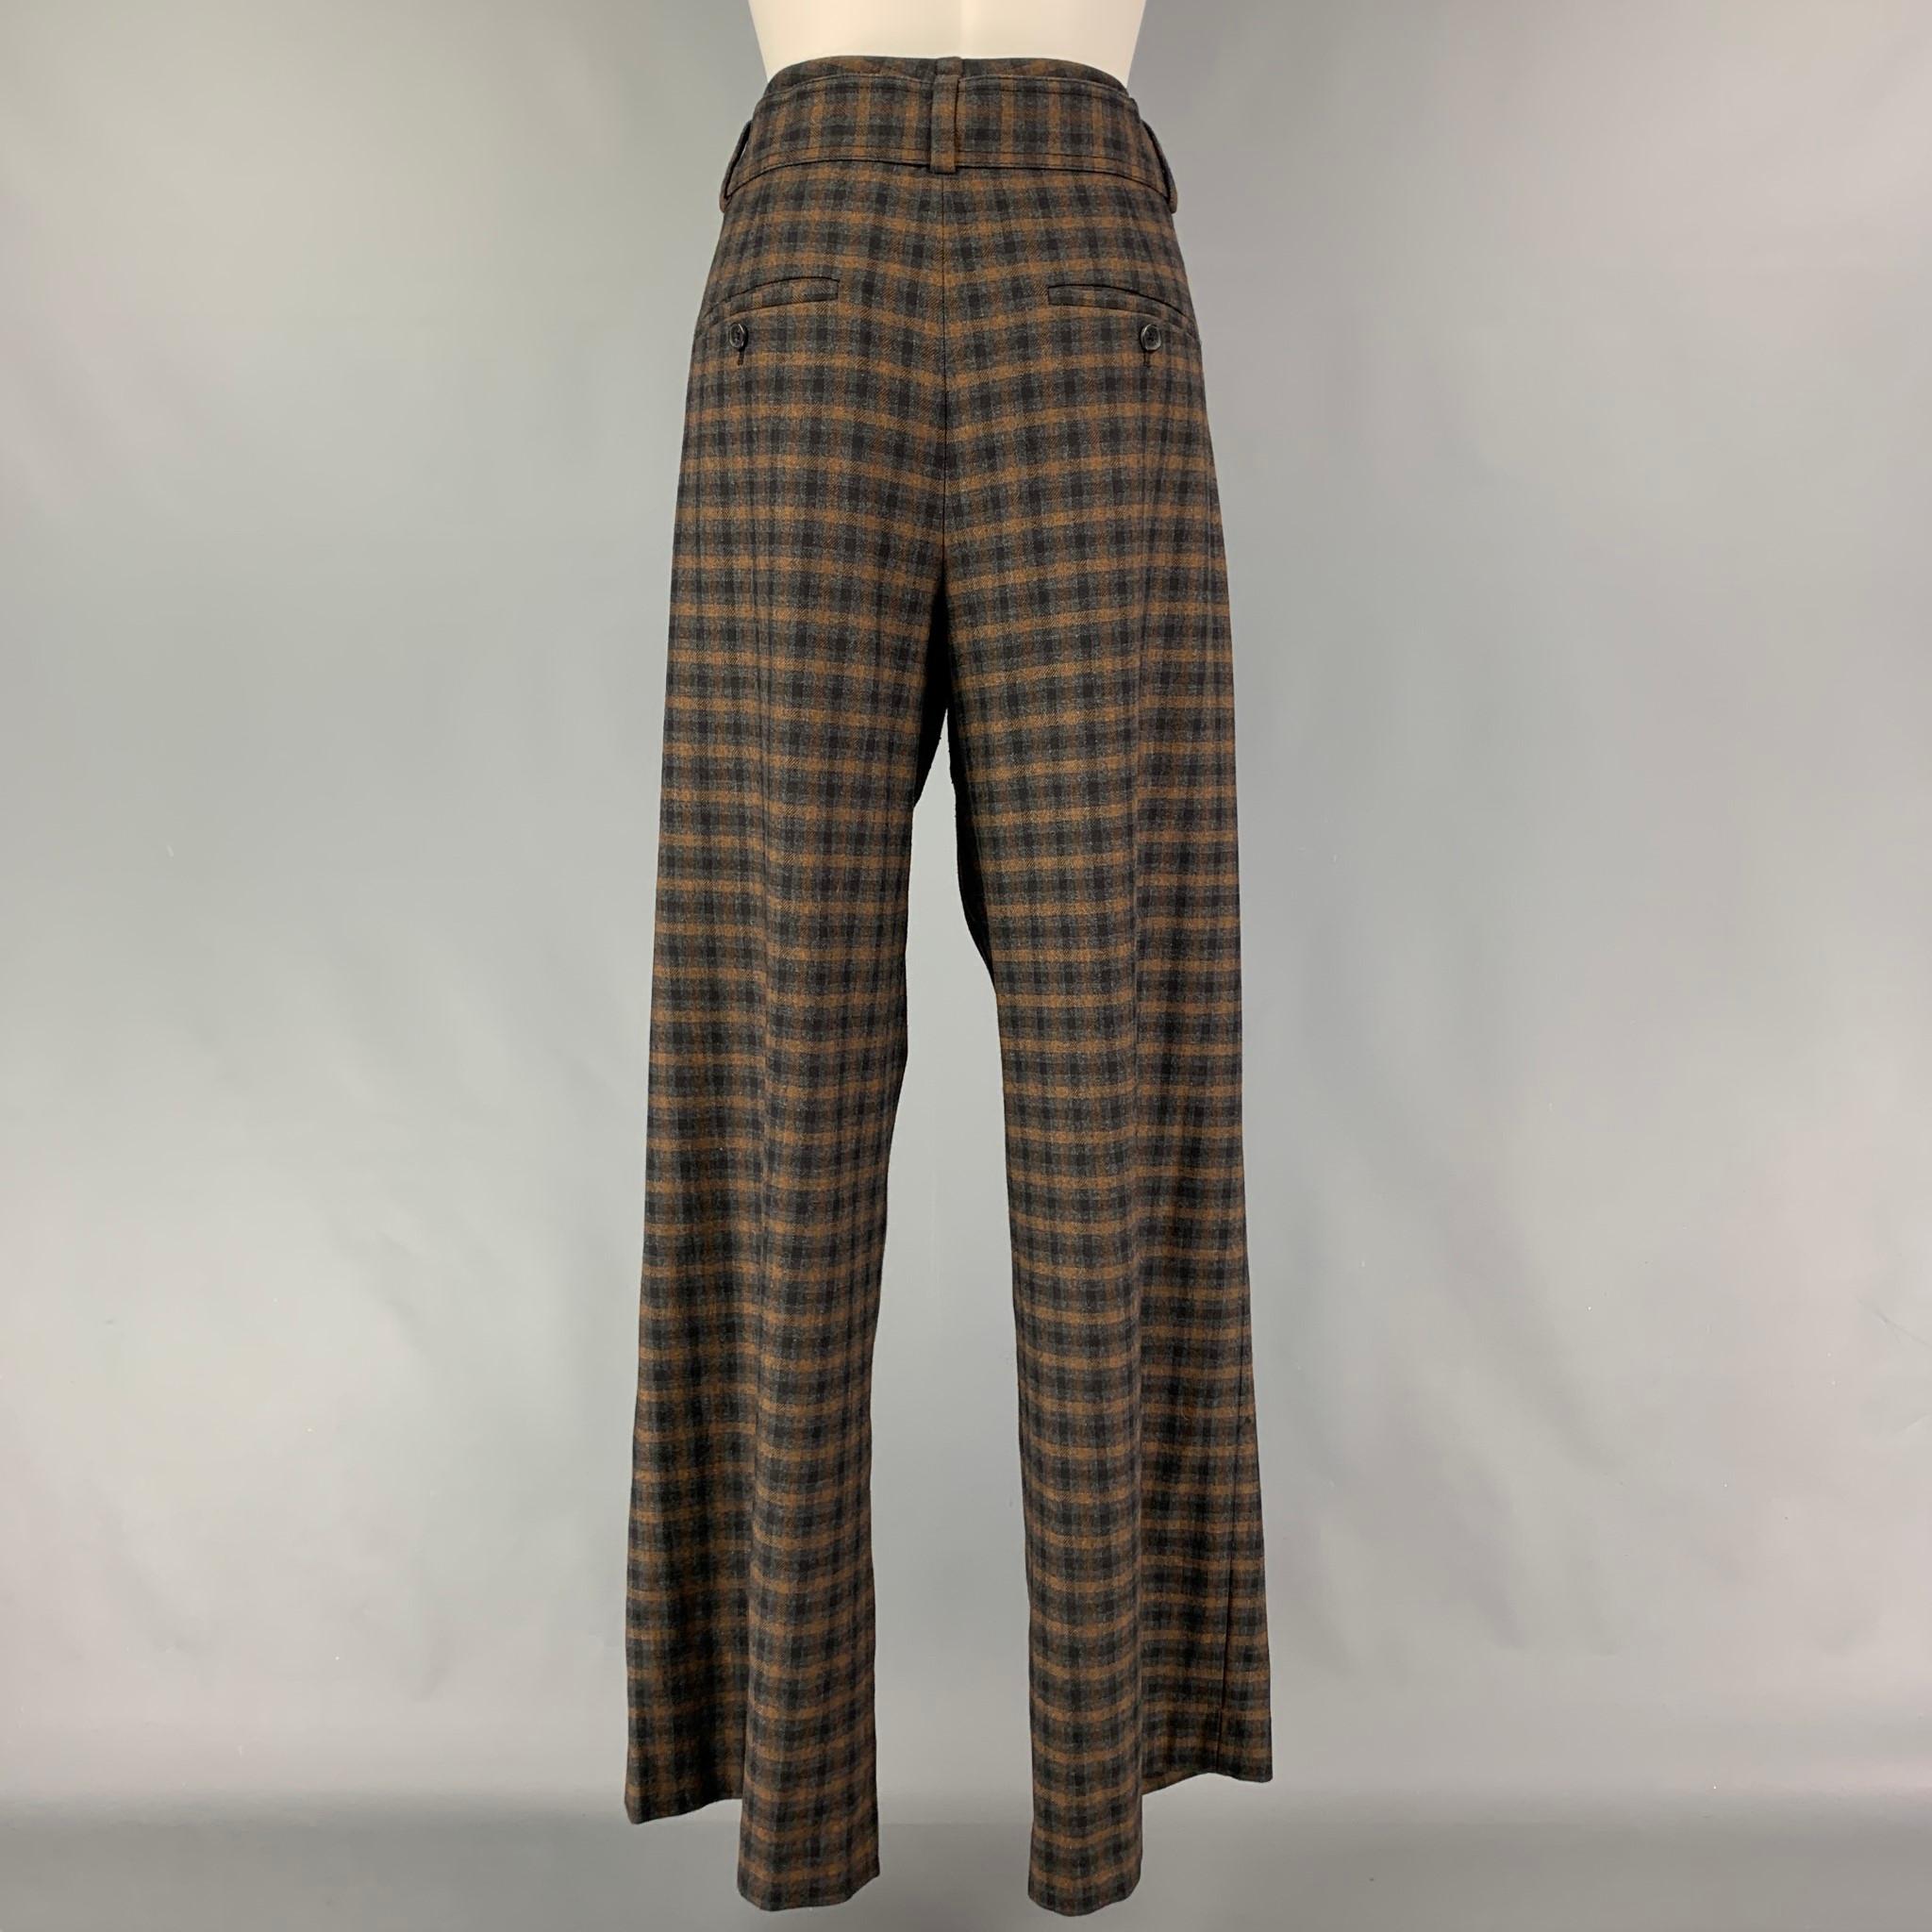 VINCE dress pants comes in a grey & brown plaid polyester blend featuring a wide leg, pleated, front tab, anda zip fly closure. 

Very Good Pre-Owned Condition.
Marked: 10

Measurements:

Waist: 32 in.
Rise: 13 in.
Inseam: 33 in. 